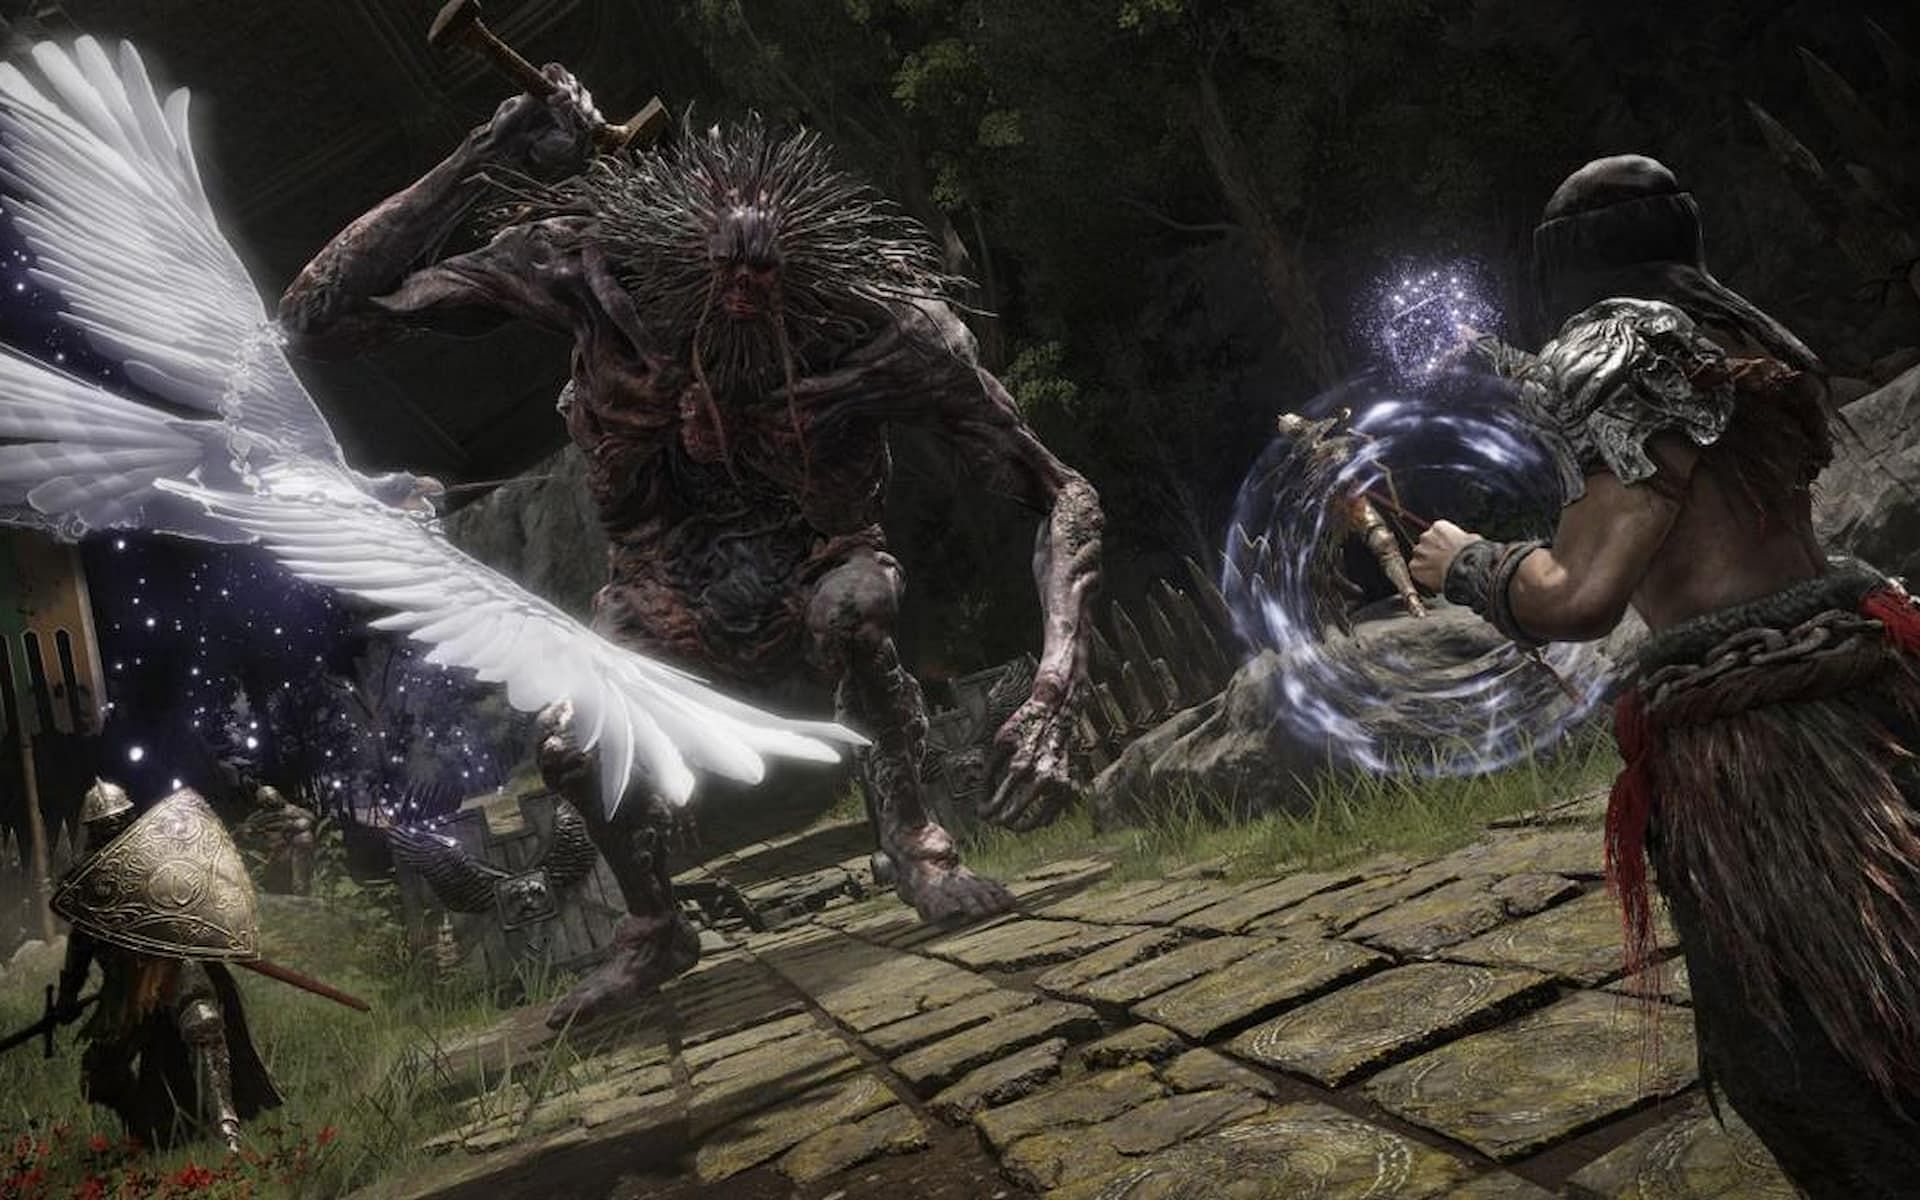 Expect intricate combat in Elden Ring (Image via FromSoftware Inc.)